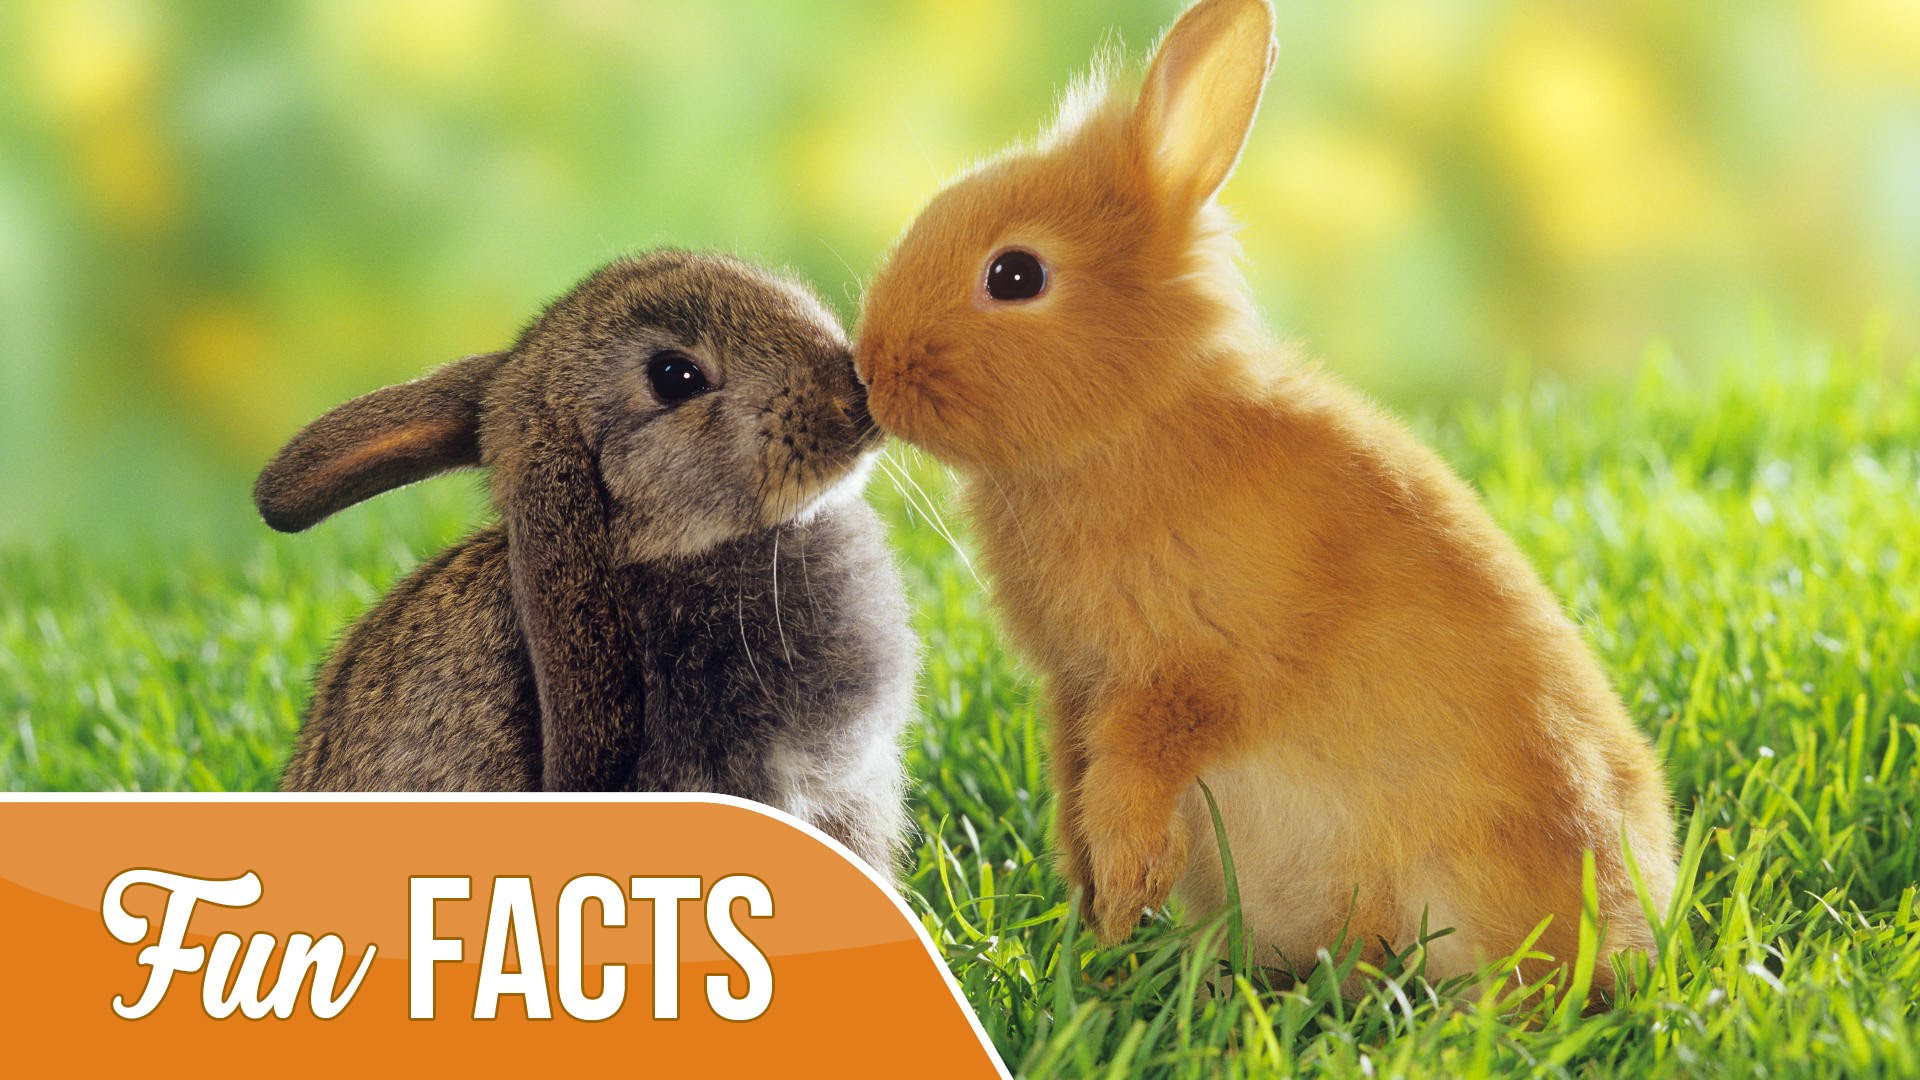 10 Fun Facts About Rabbits - YouTube